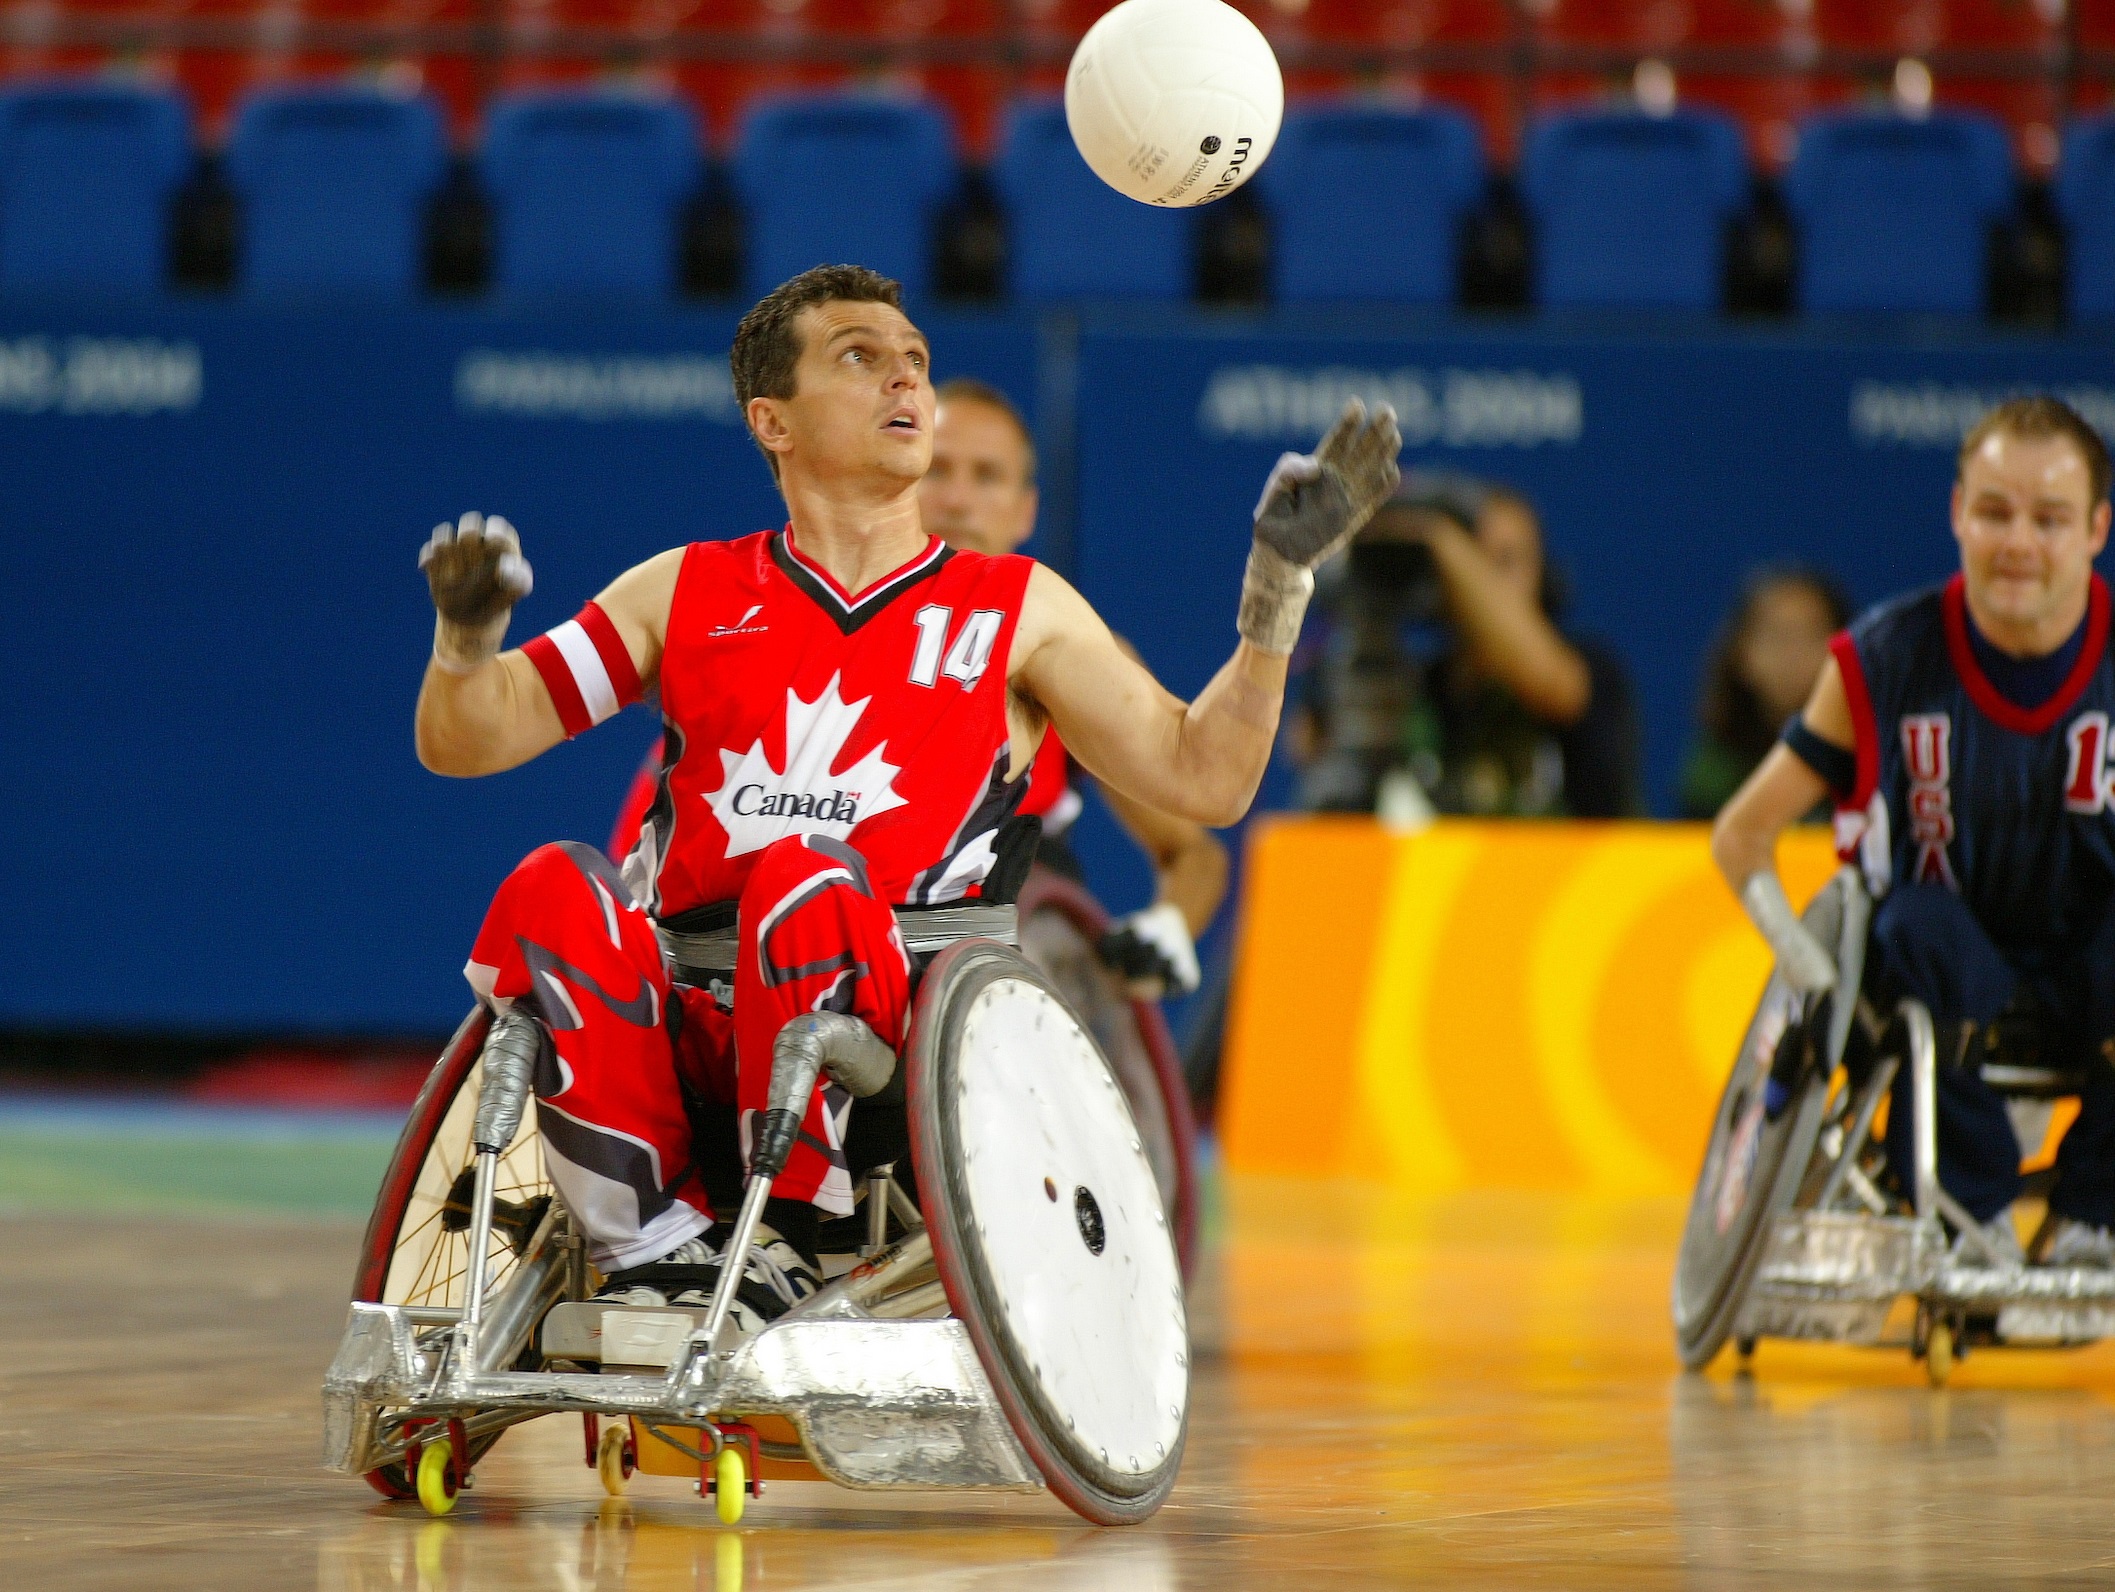 David Willsie in wheelchair rugby action about to catch the ball